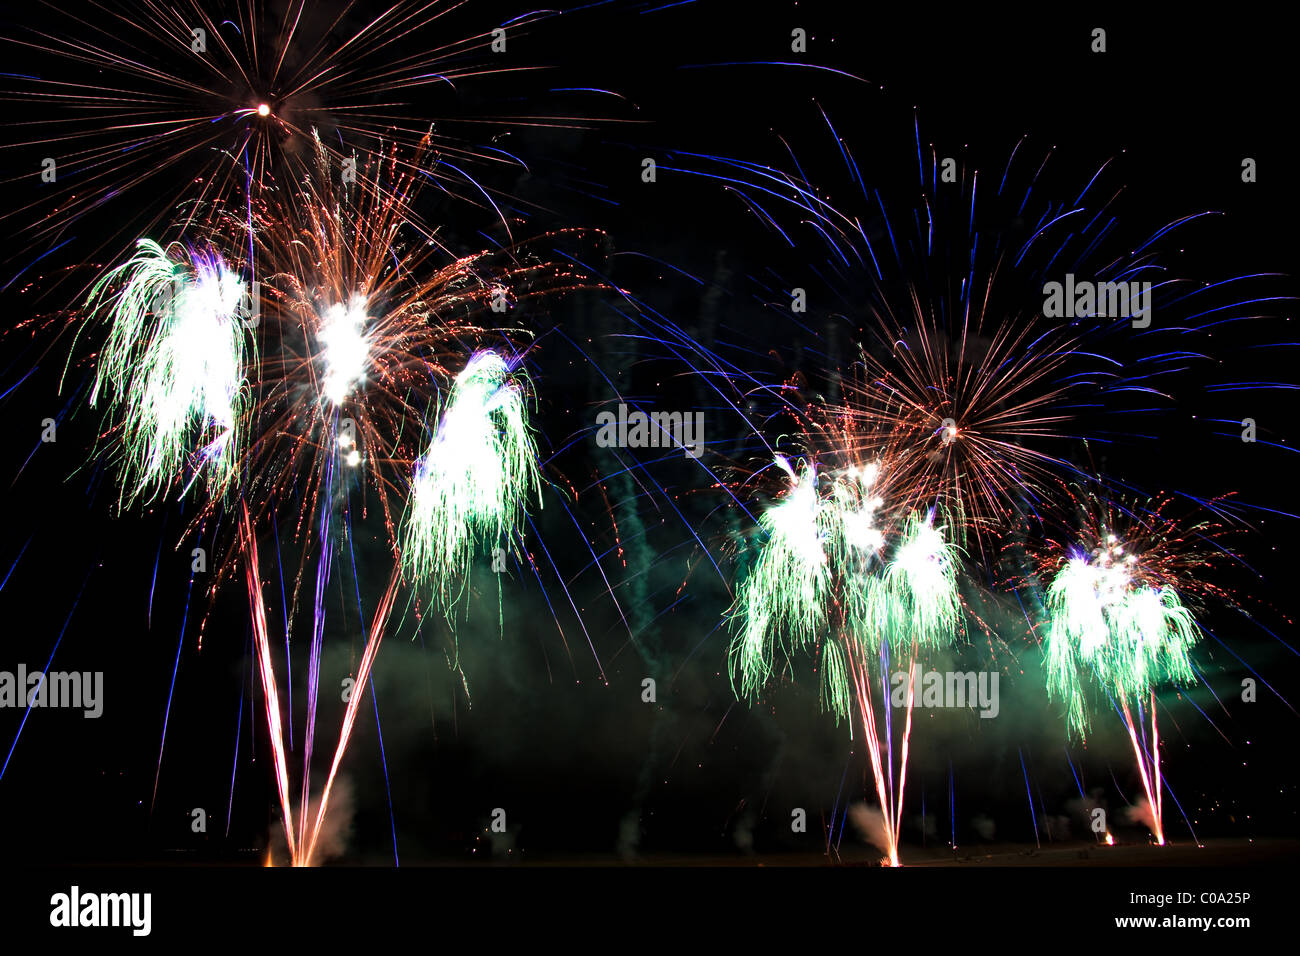 Fireworks of the competition 'Fiocchi di Luce'. Stock Photo